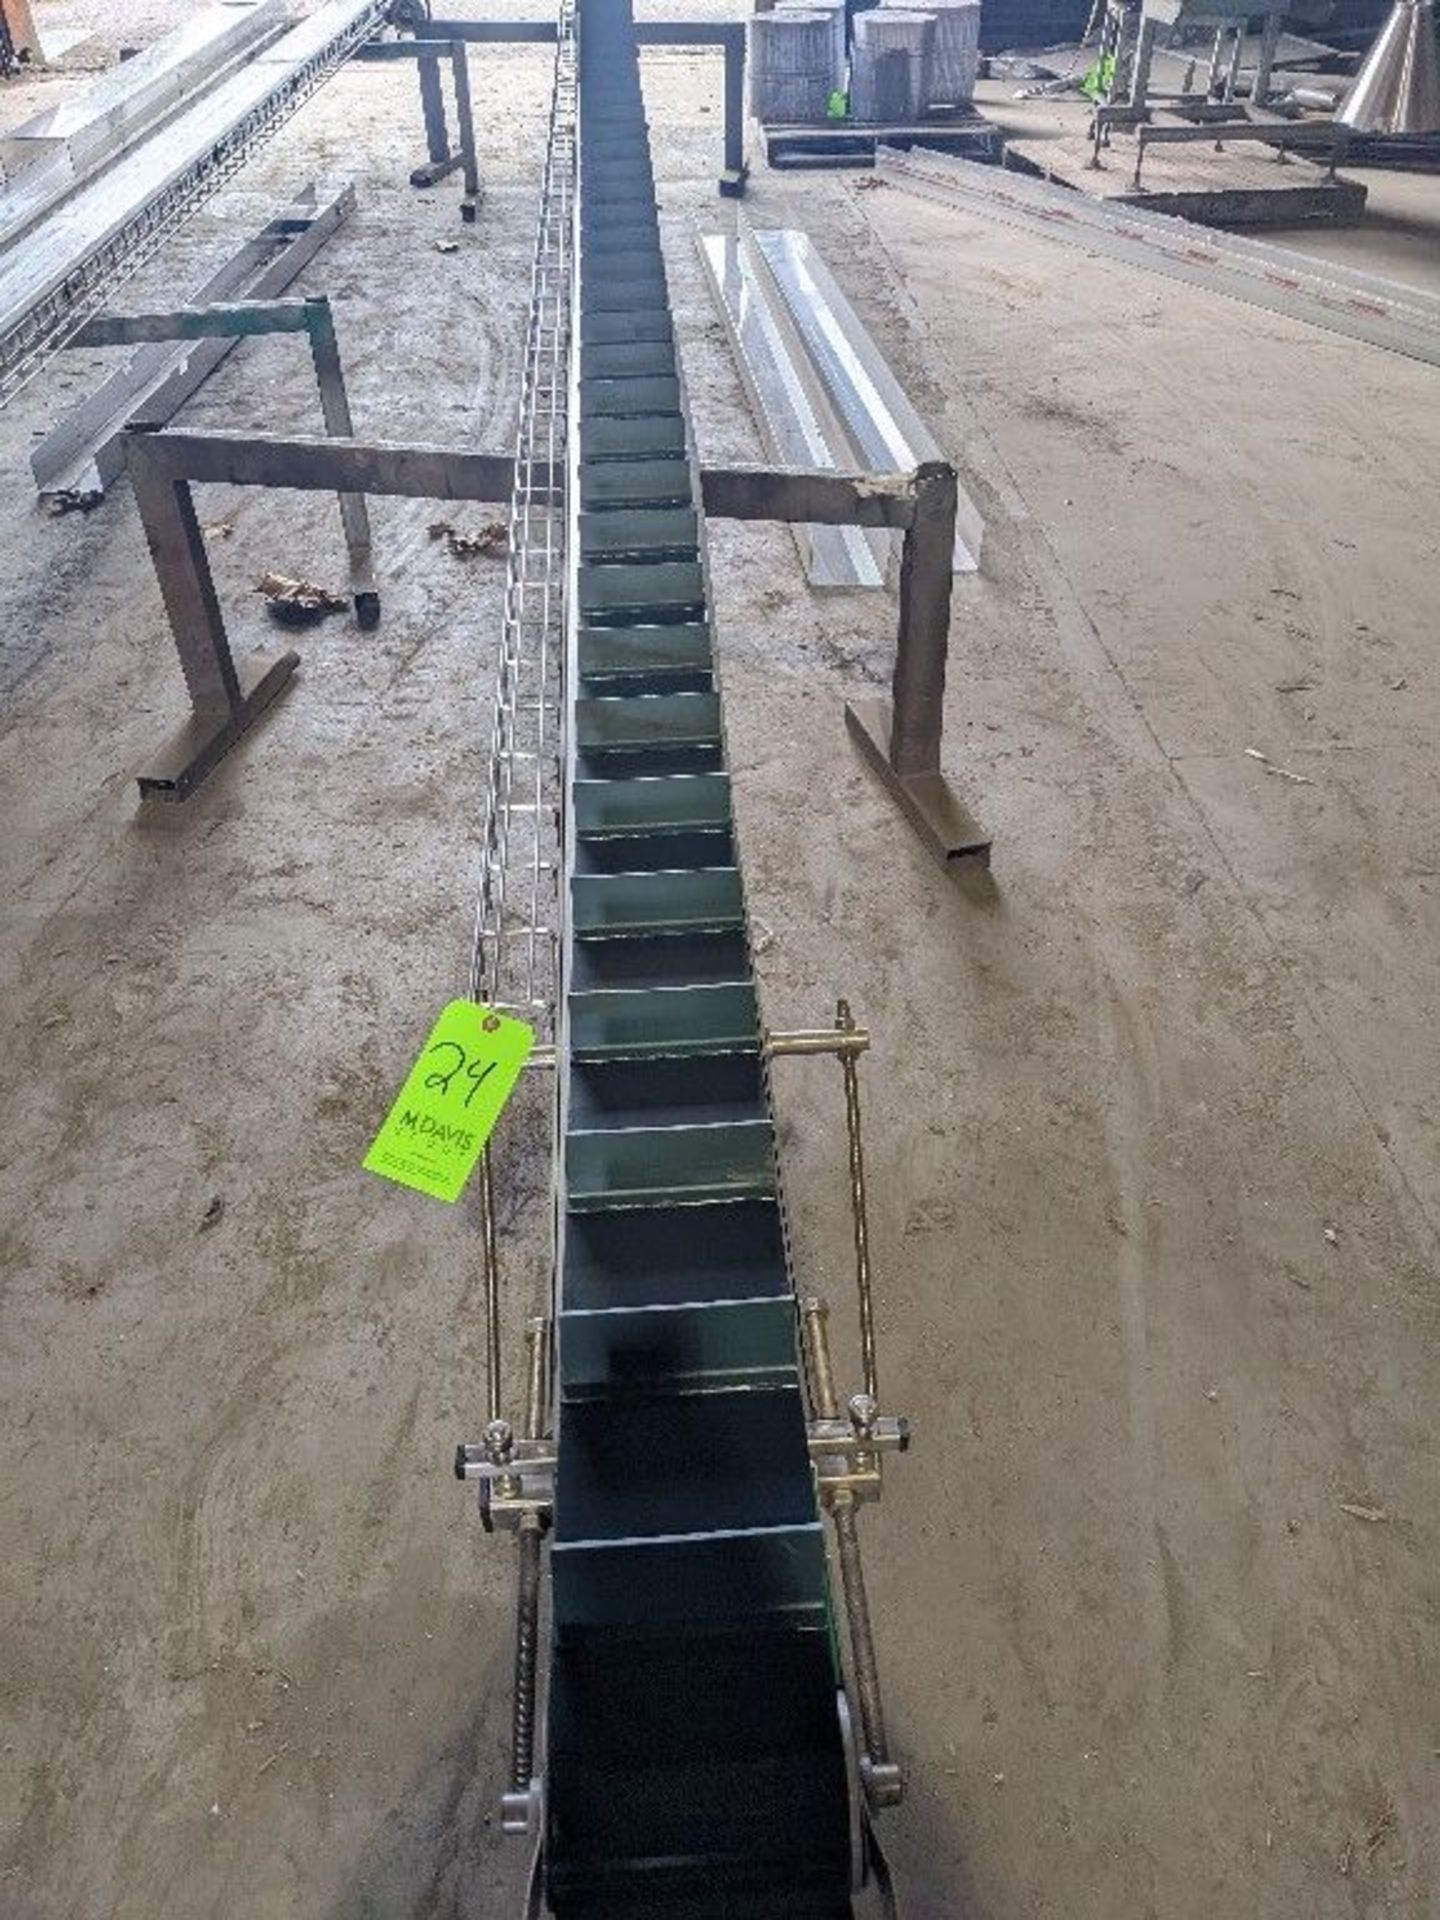 Gassner Cleated Belt Conveyor - 6" W Belt - 2" Tall Cleates - 348" L - Motor: SEW-Euro Drive 240/